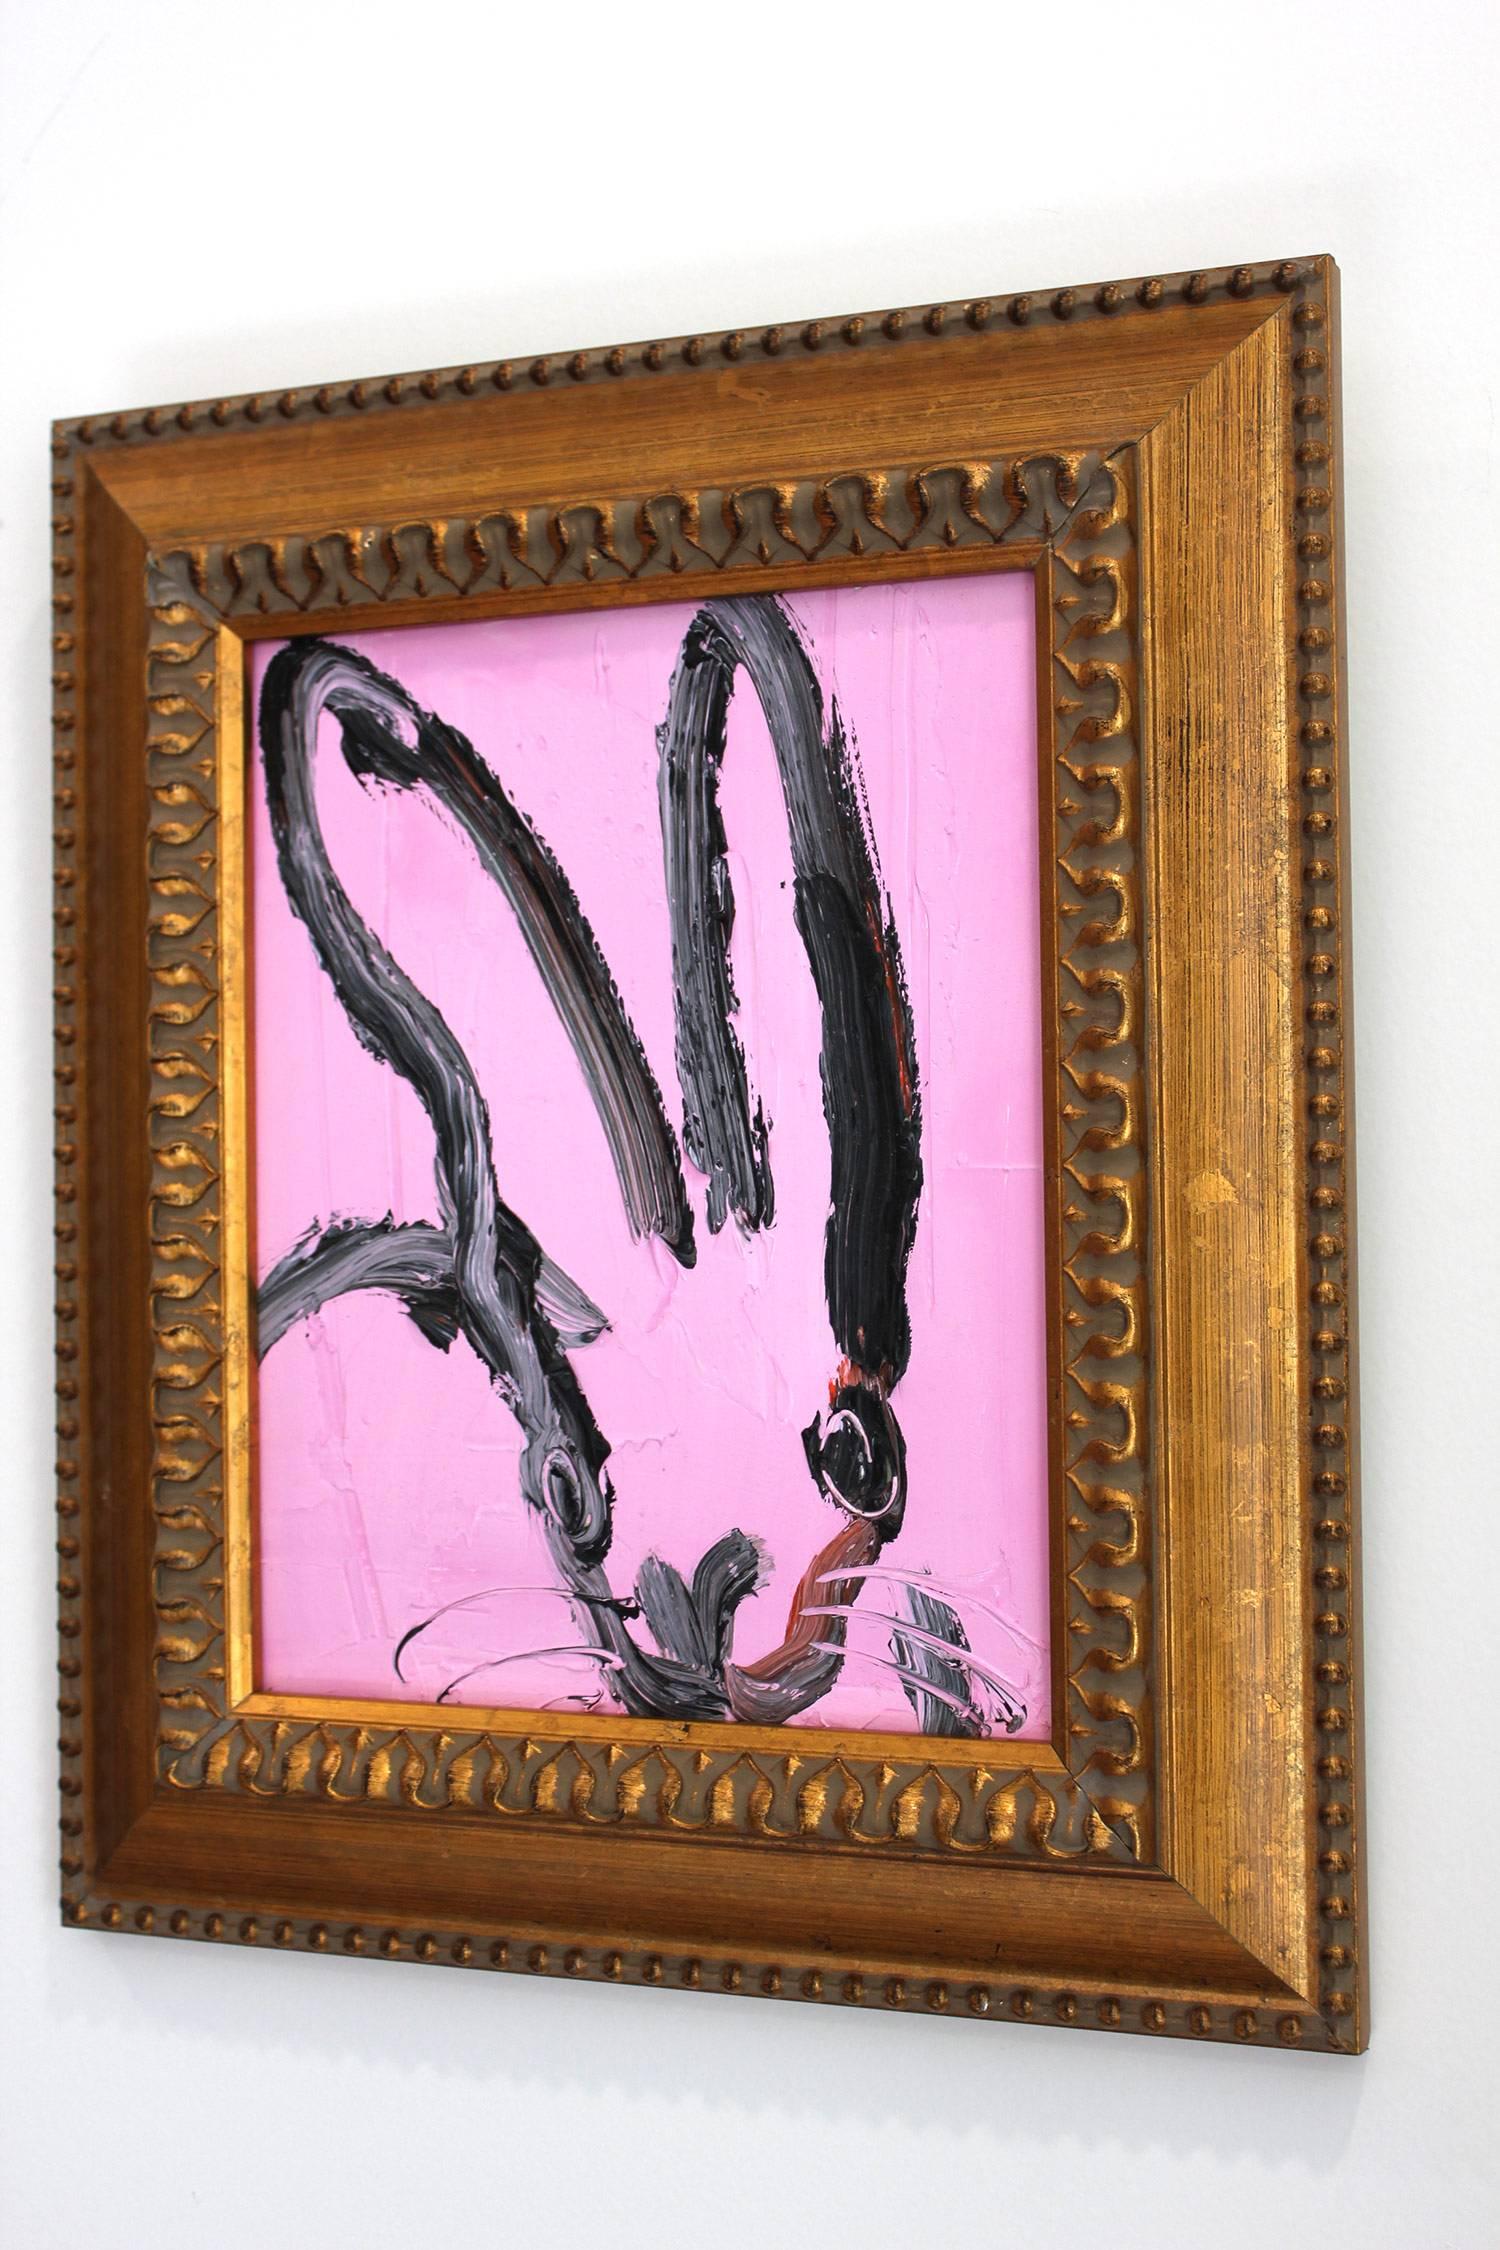 A wonderful composition of one of Slonem's most iconic subjects, Bunnies. This piece depicts a gestural figure of a black bunny on a Lavender background with thick use of paint. It is housed in a wonderful antique 19th Century frame. Inspired by